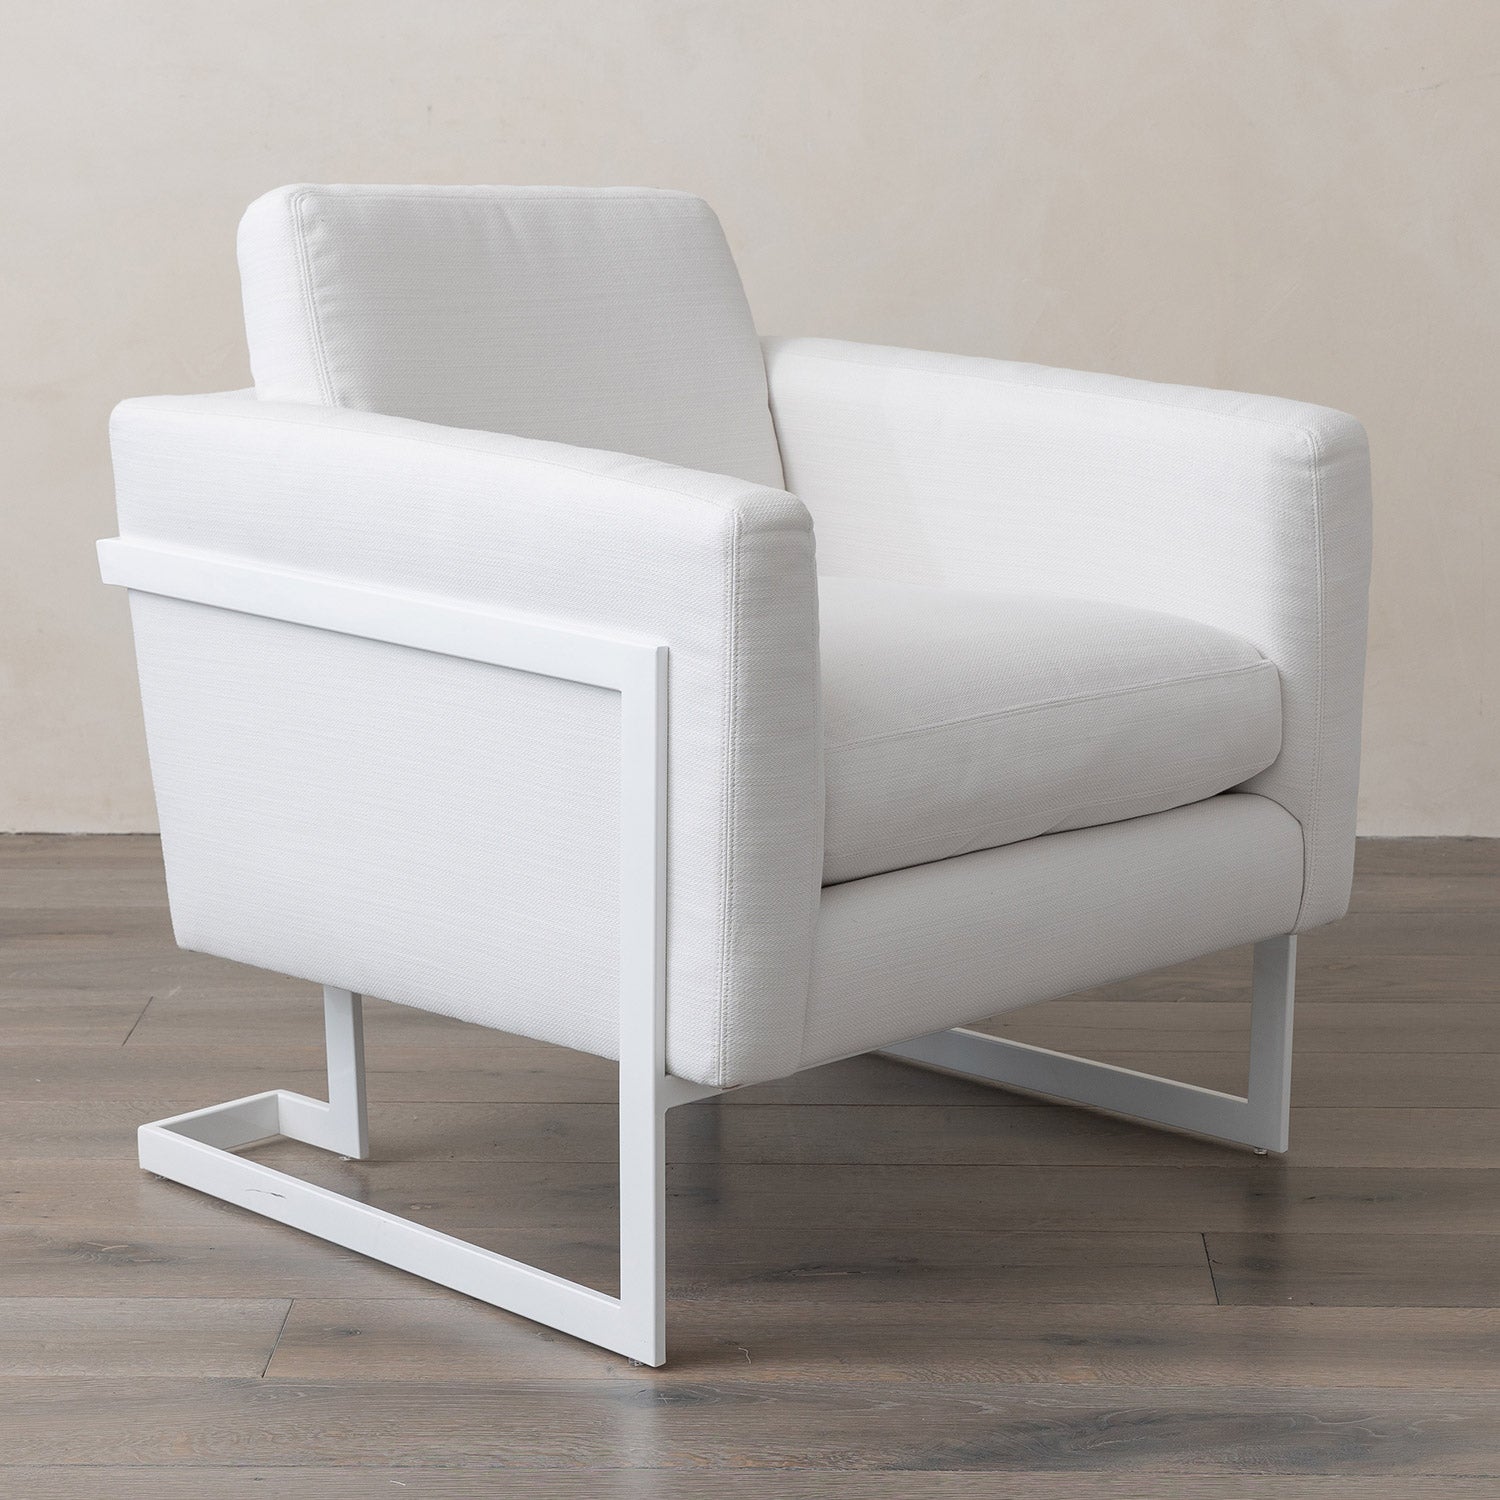 Reef Outdoor Chair in Fresno Alabaster